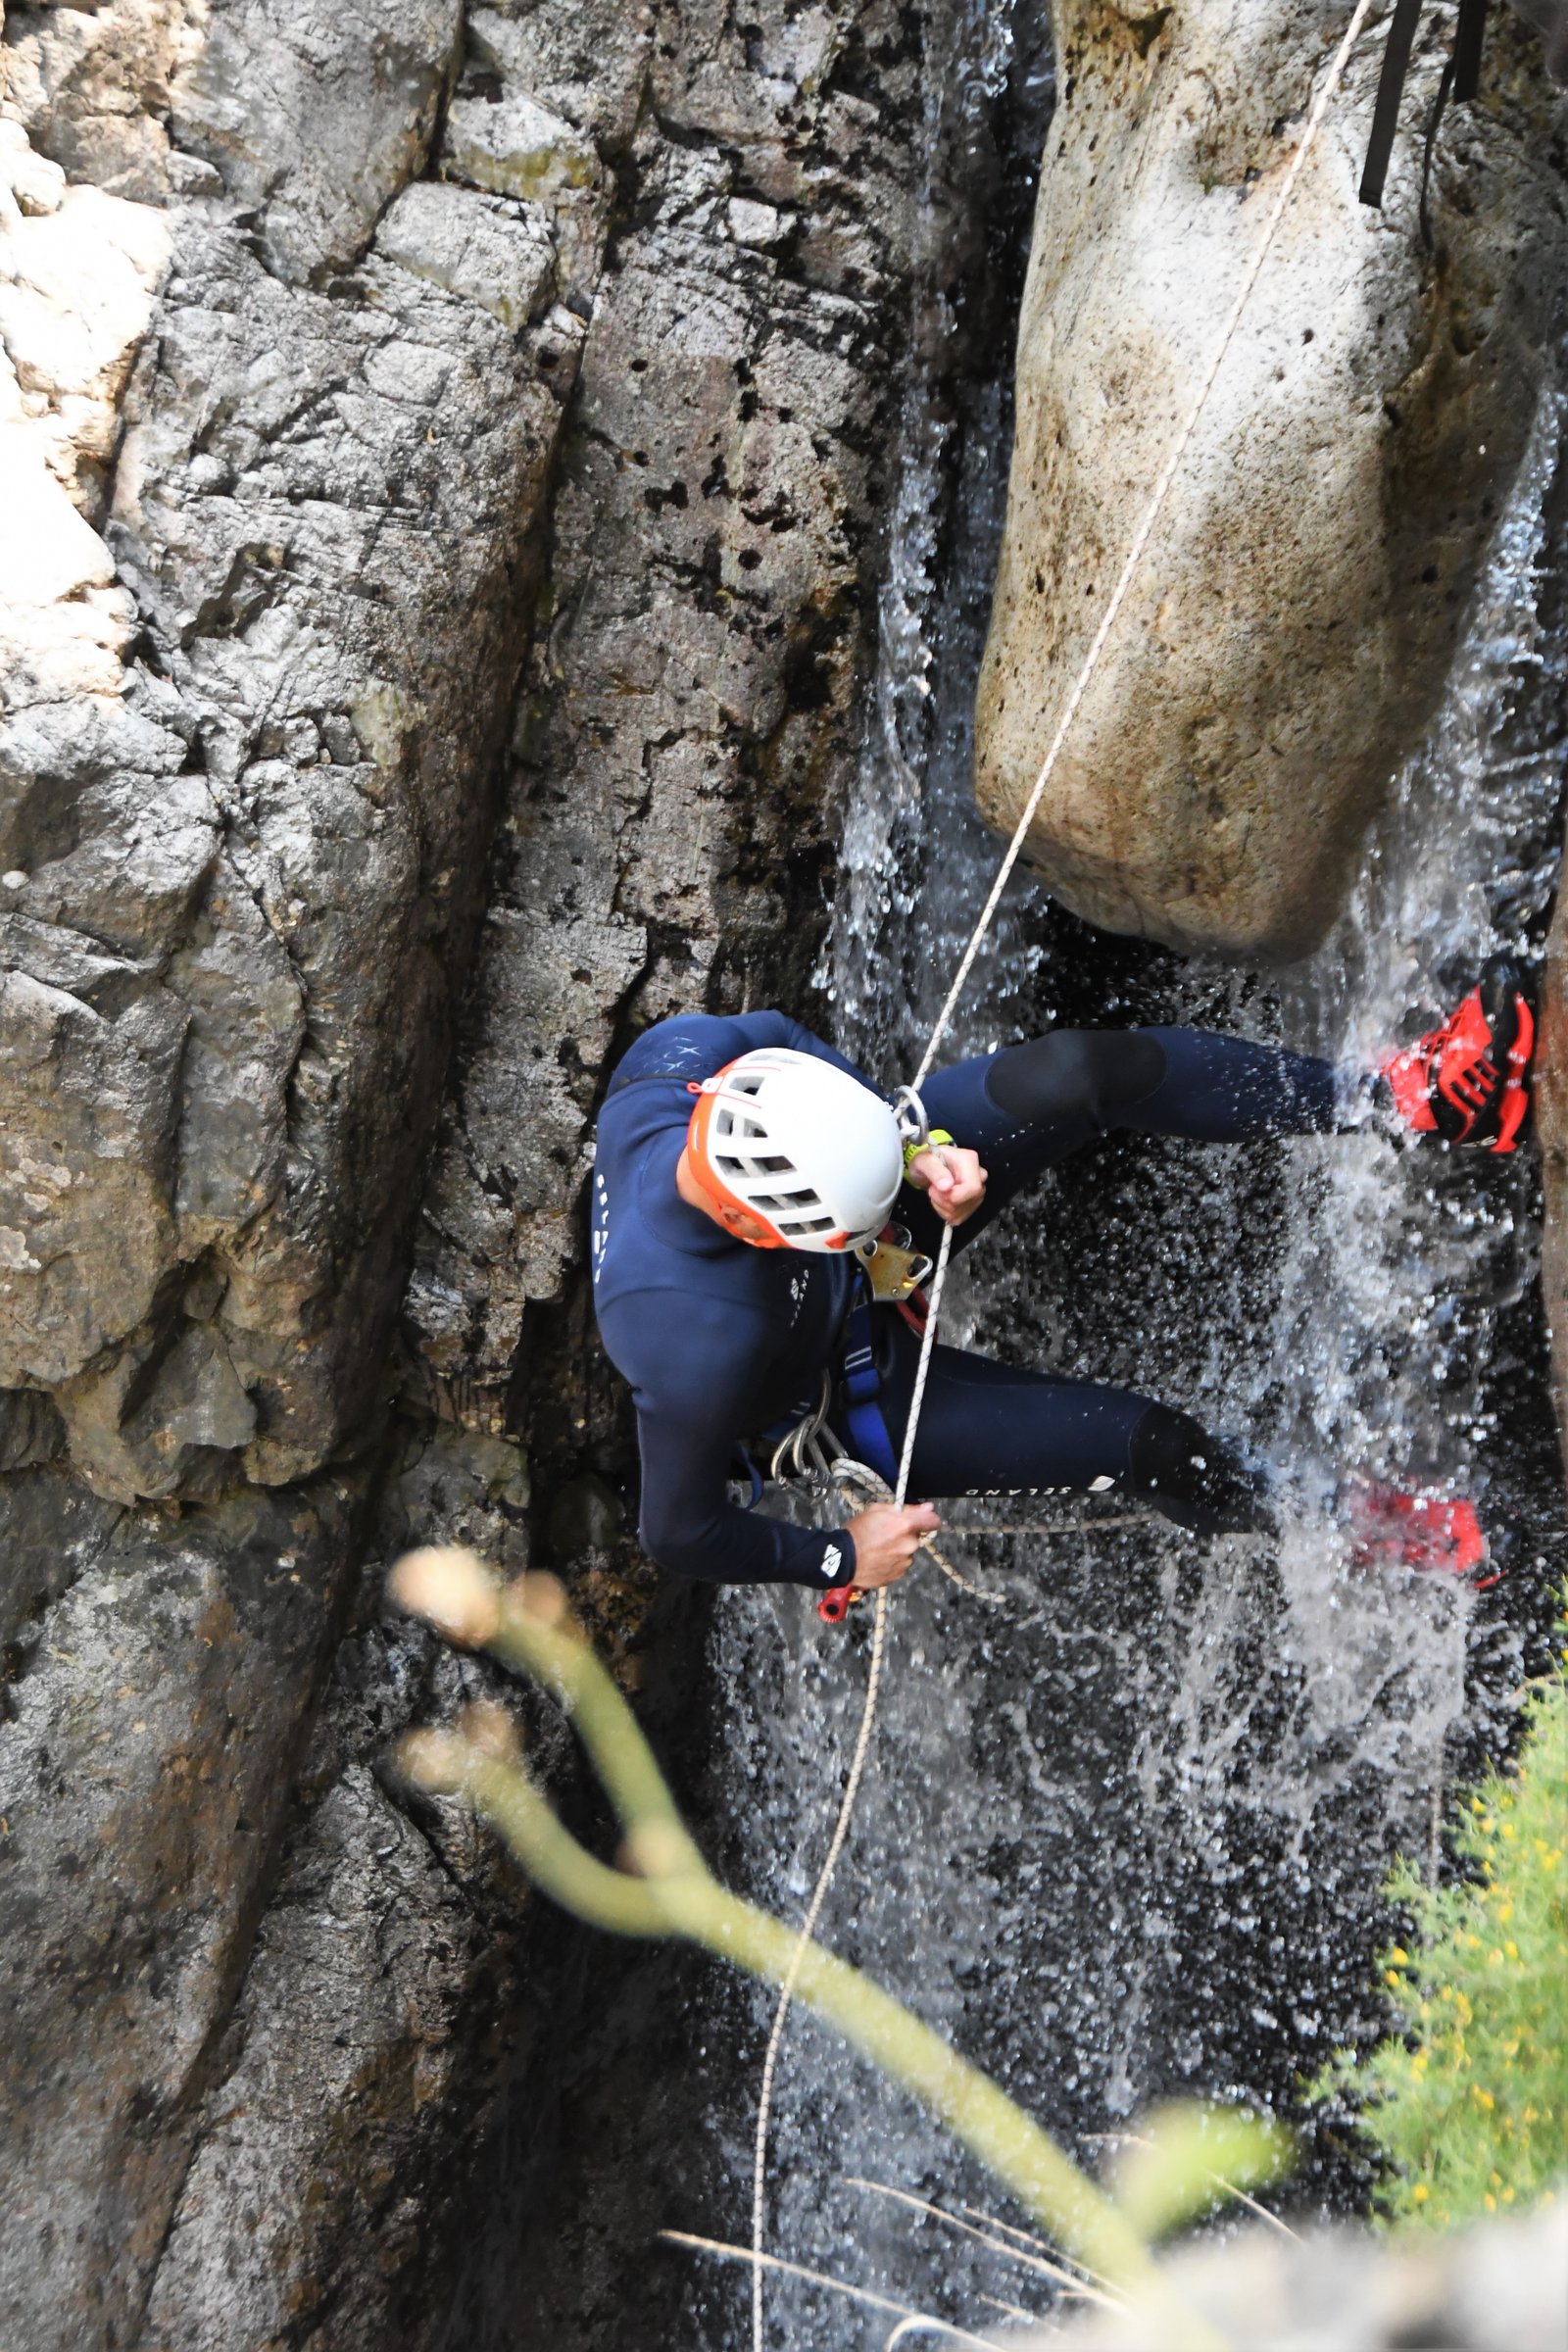 Person rappelling in the Richiusa Canyon